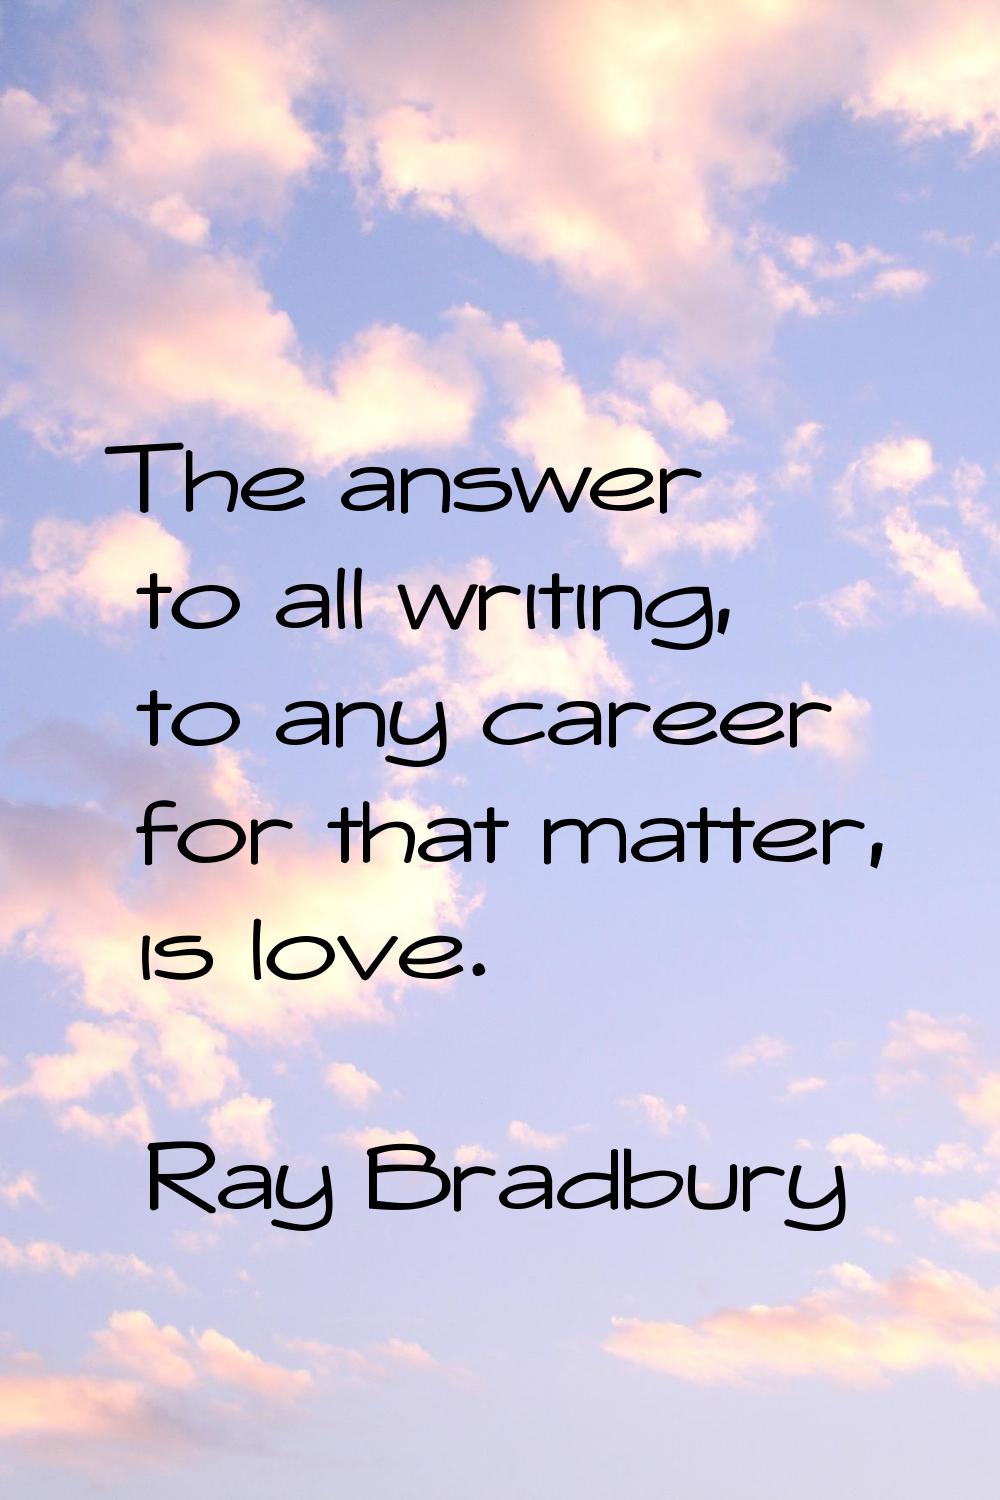 The answer to all writing, to any career for that matter, is love.